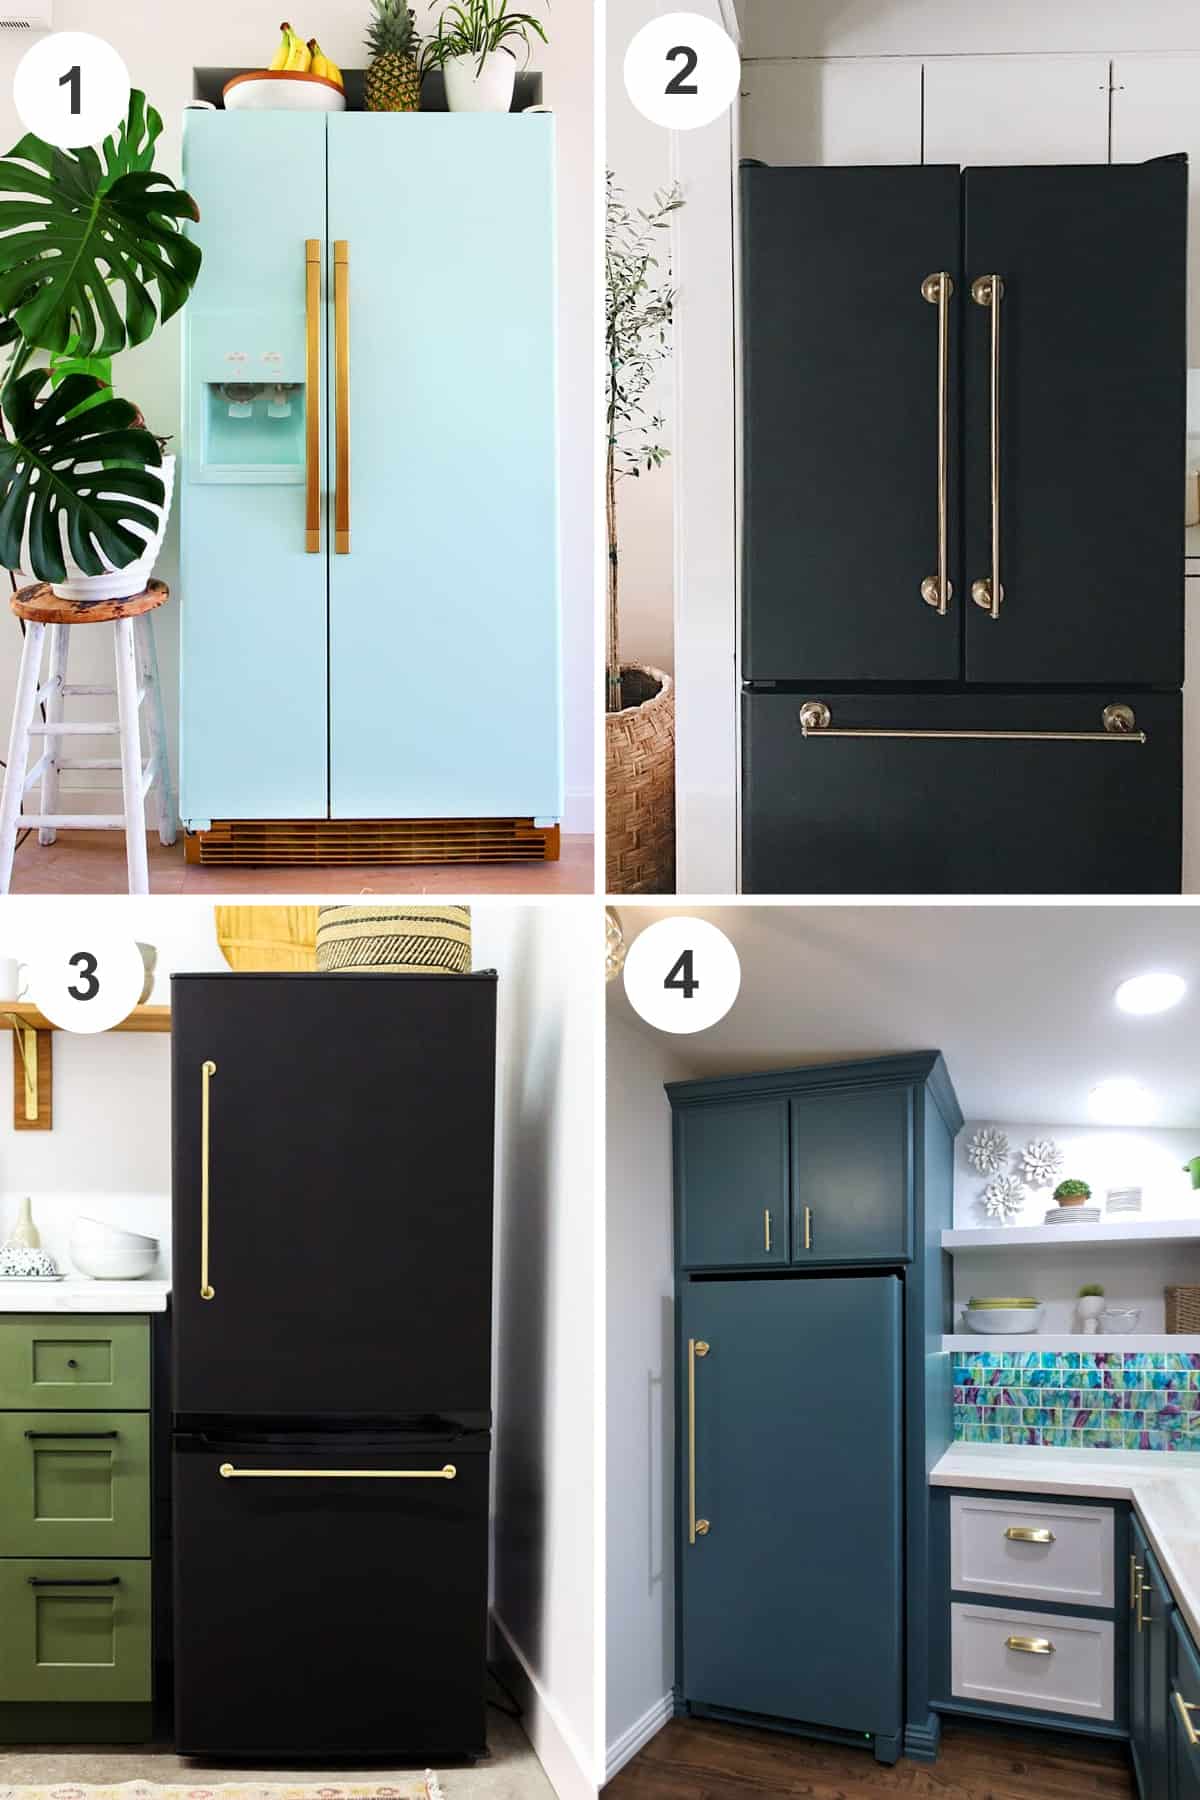 Painted refrigerator makeovers that look sleek and modern.